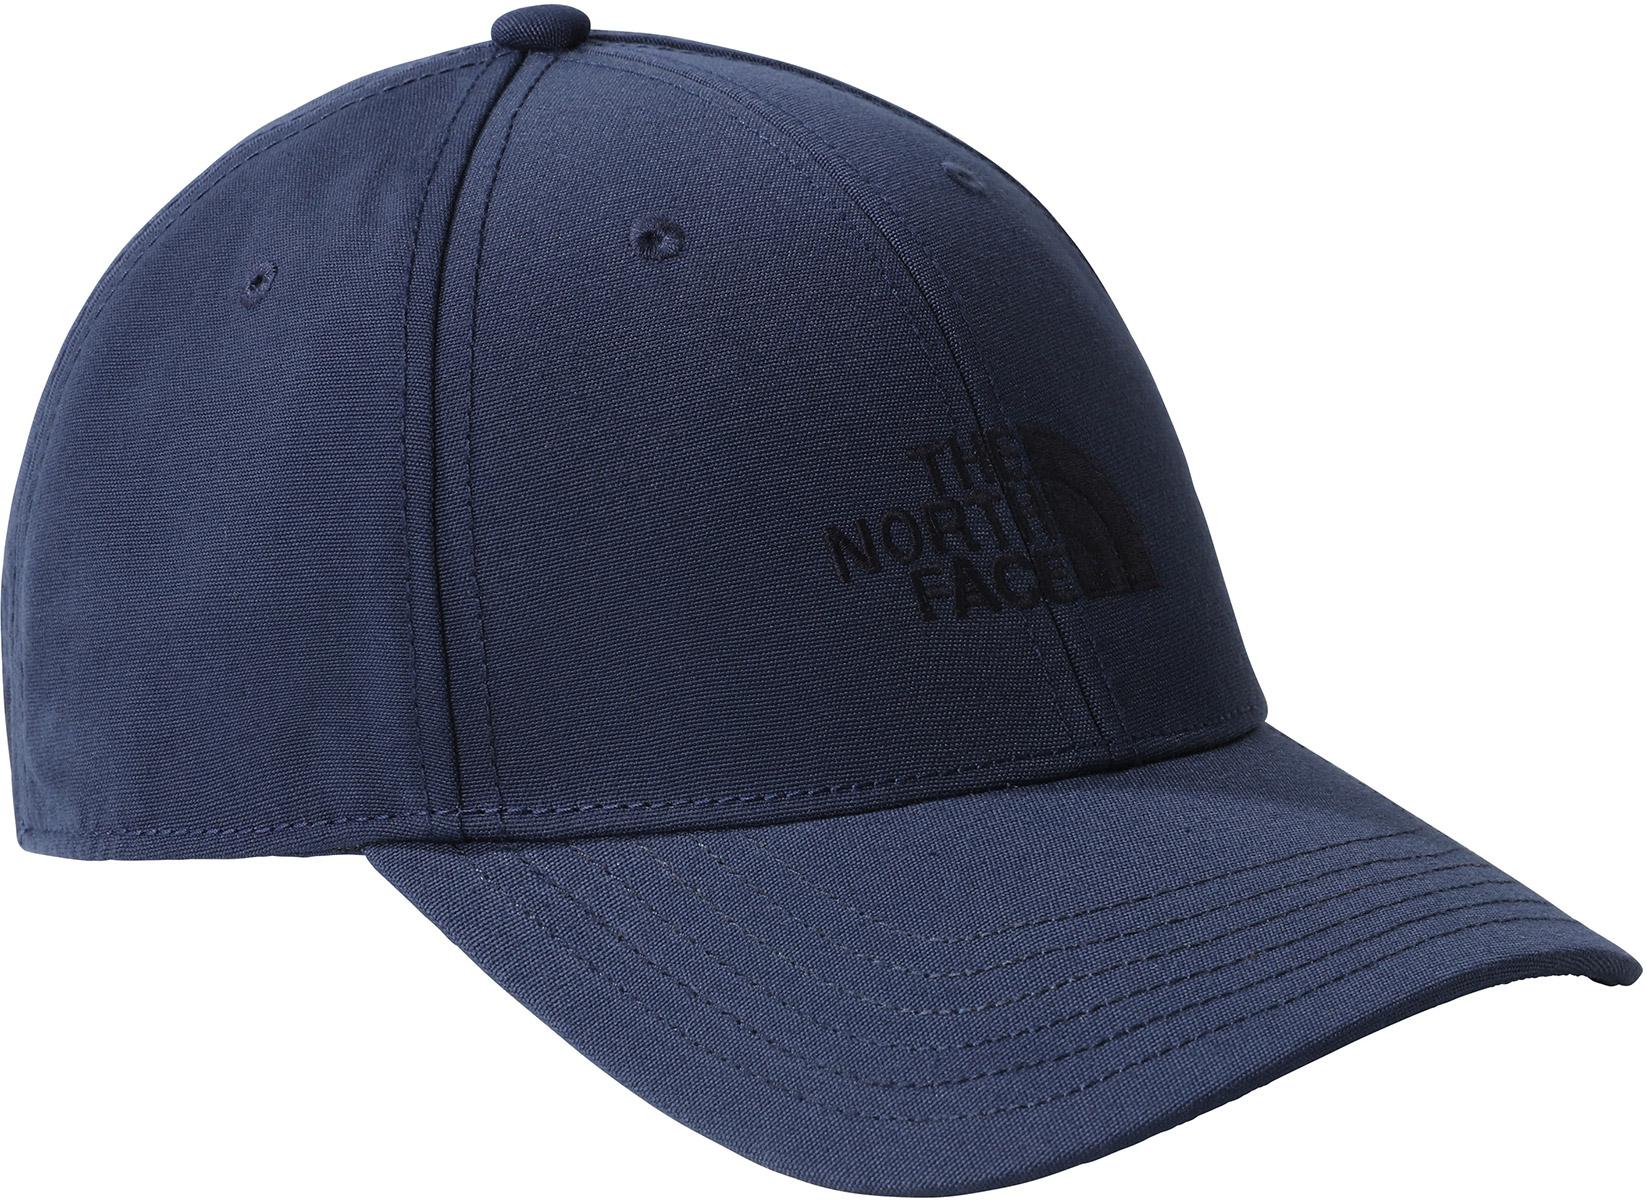 The North Face Recycled 66 Classic Hat - Summit Navy